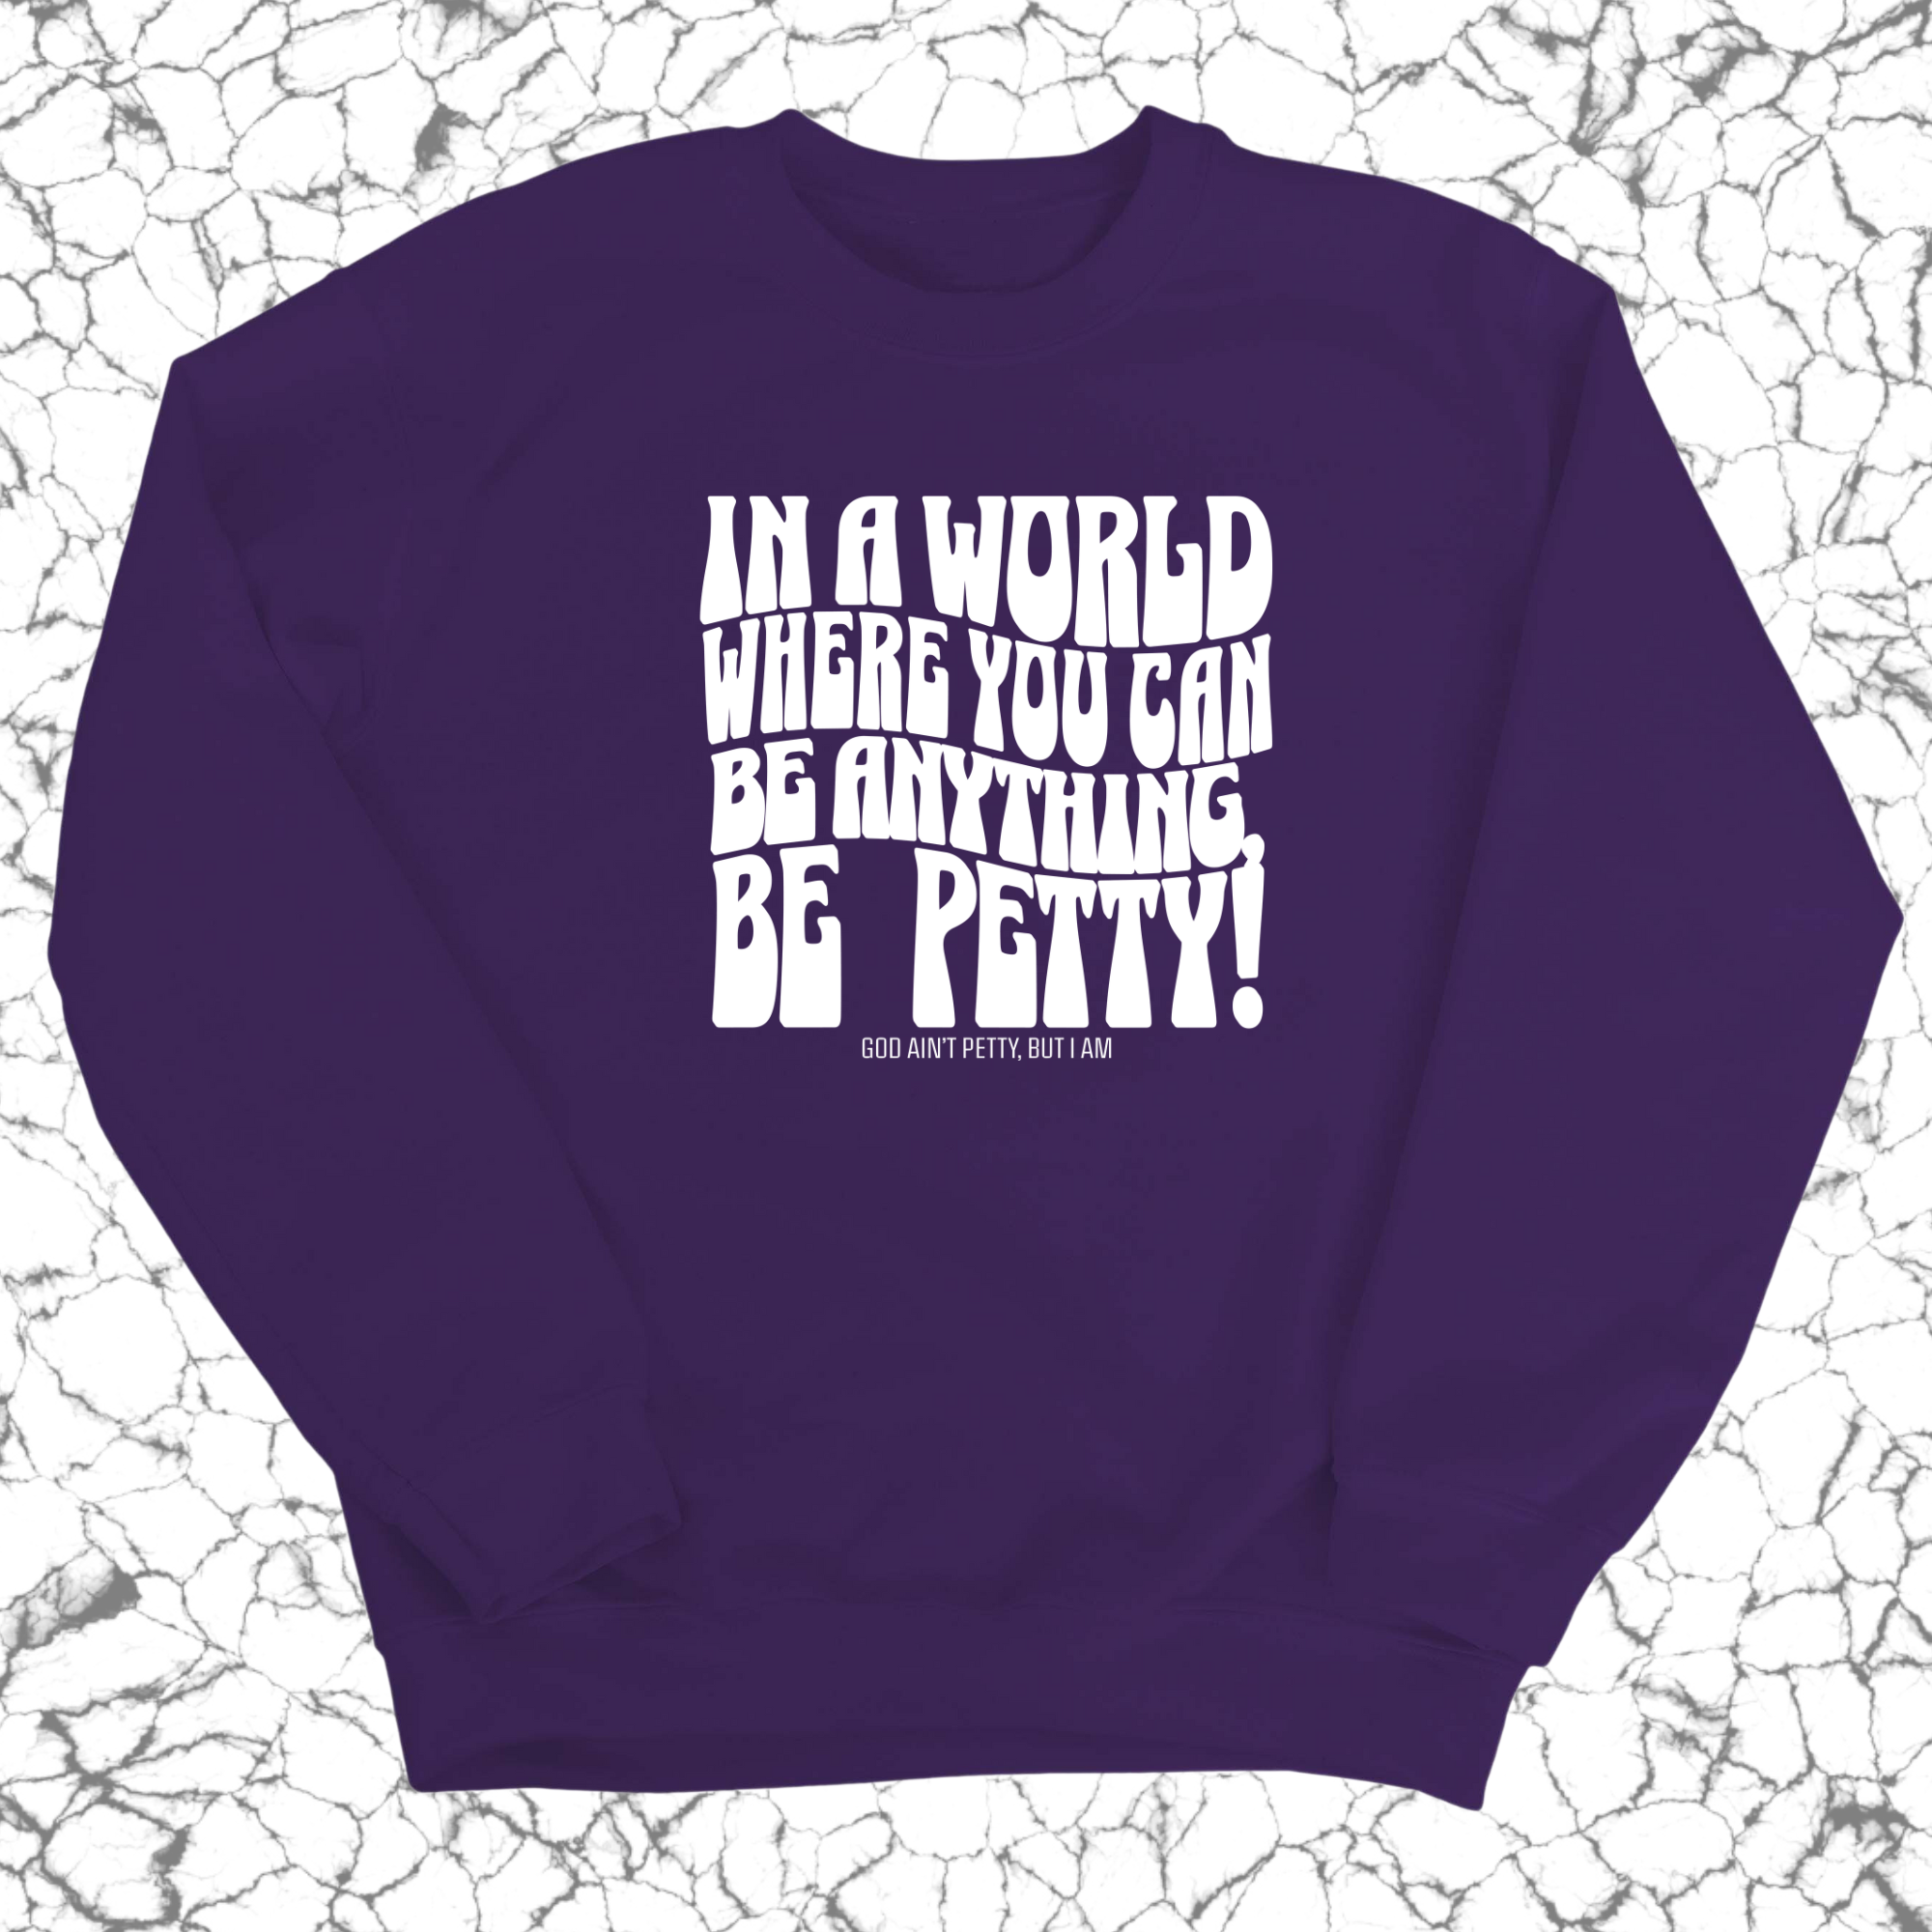 In a world where you can be anything, BE PETTY Unisex Sweatshirt-Sweatshirt-The Original God Ain't Petty But I Am